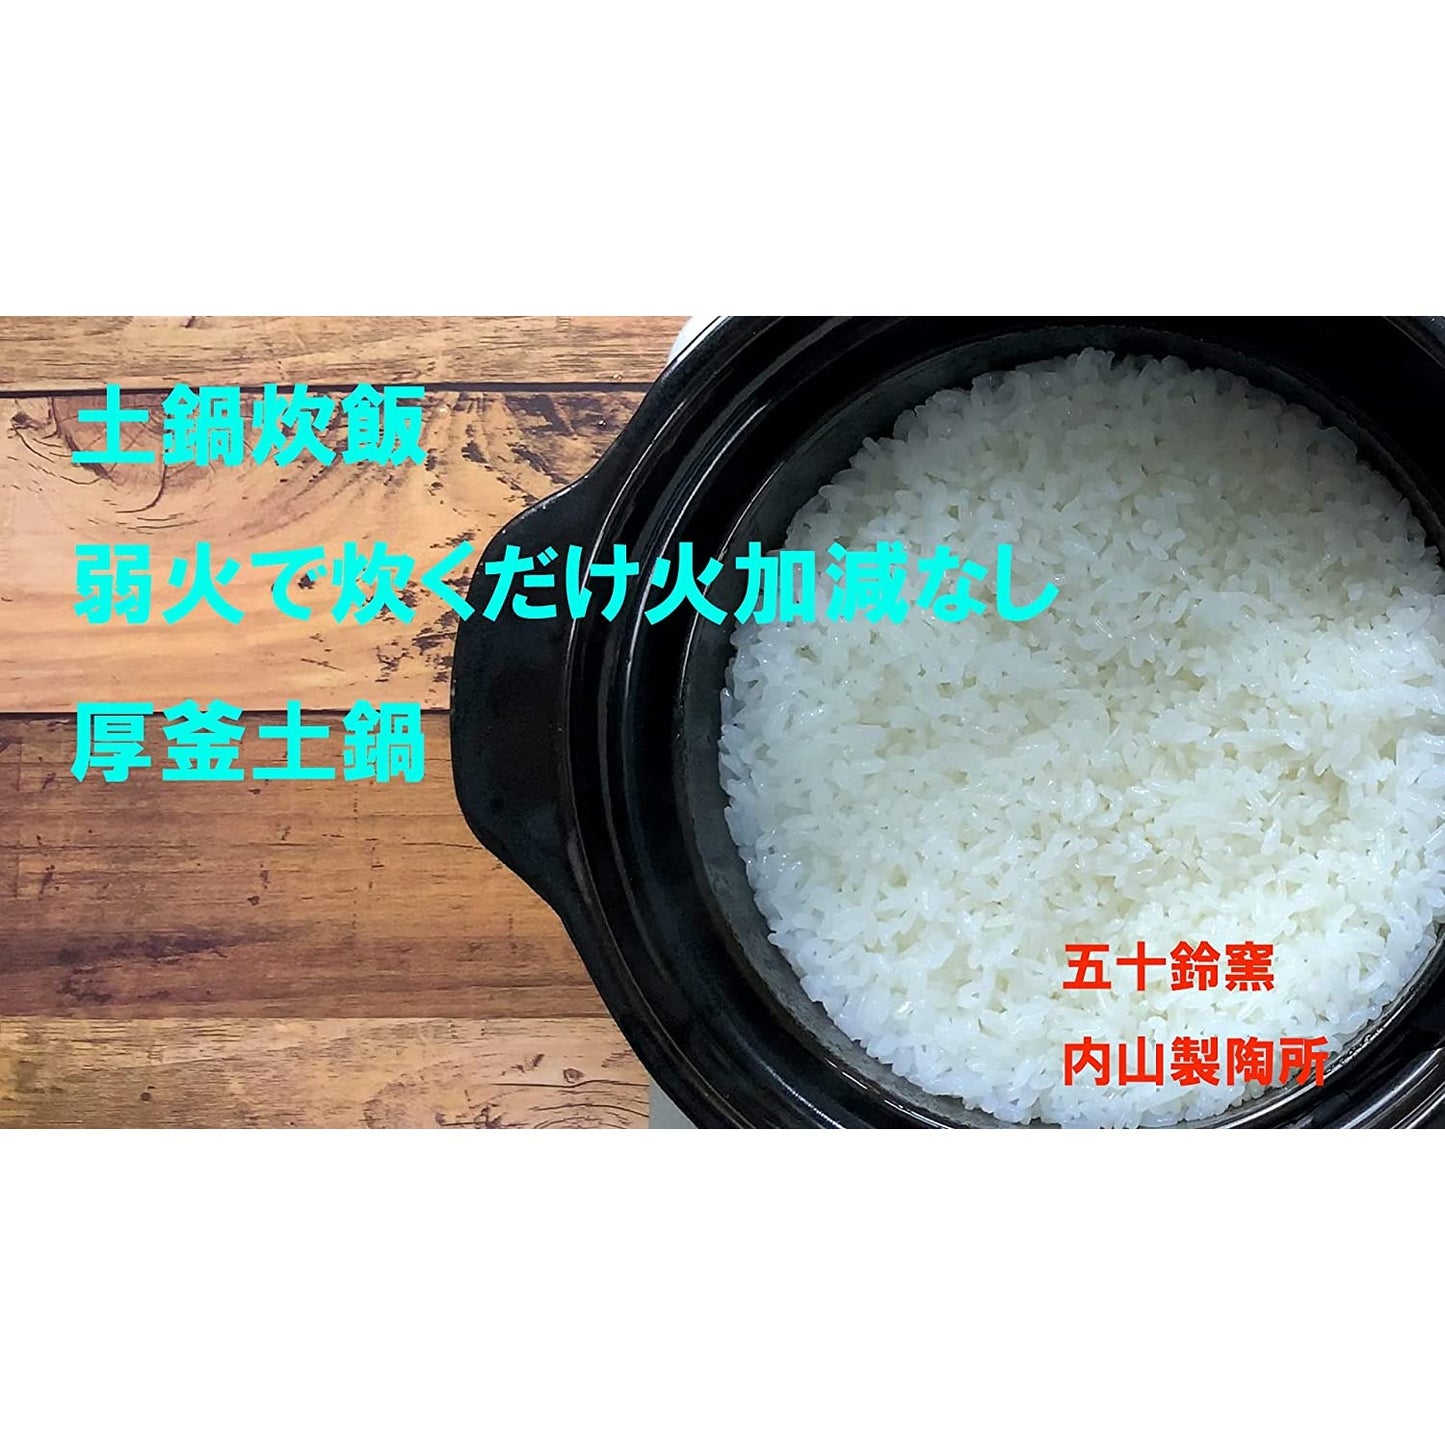 Japanese Style Rice Cooker (Made in Japan)